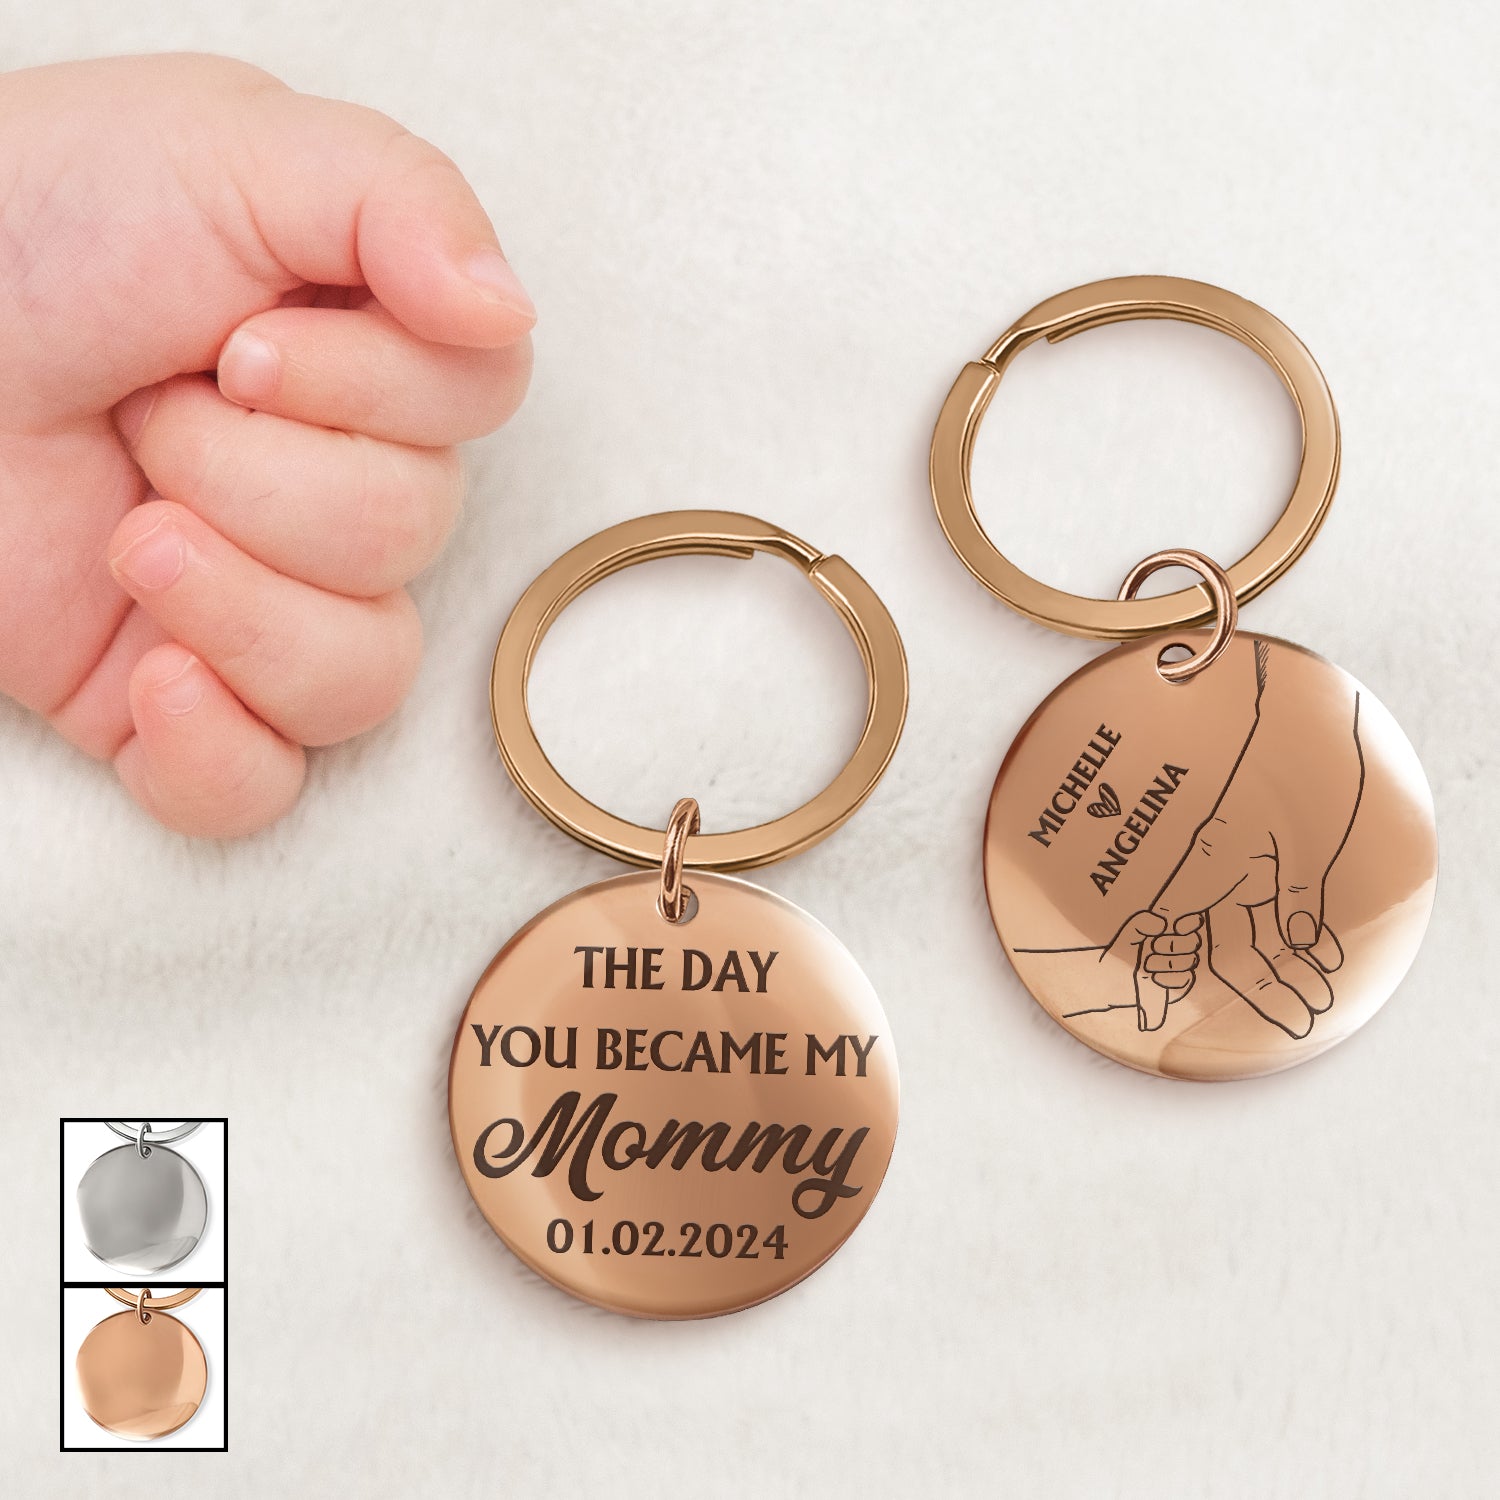 The Day You Became My Mummy - Gift For Mom, Mother, New Mom - Personalized Keyring